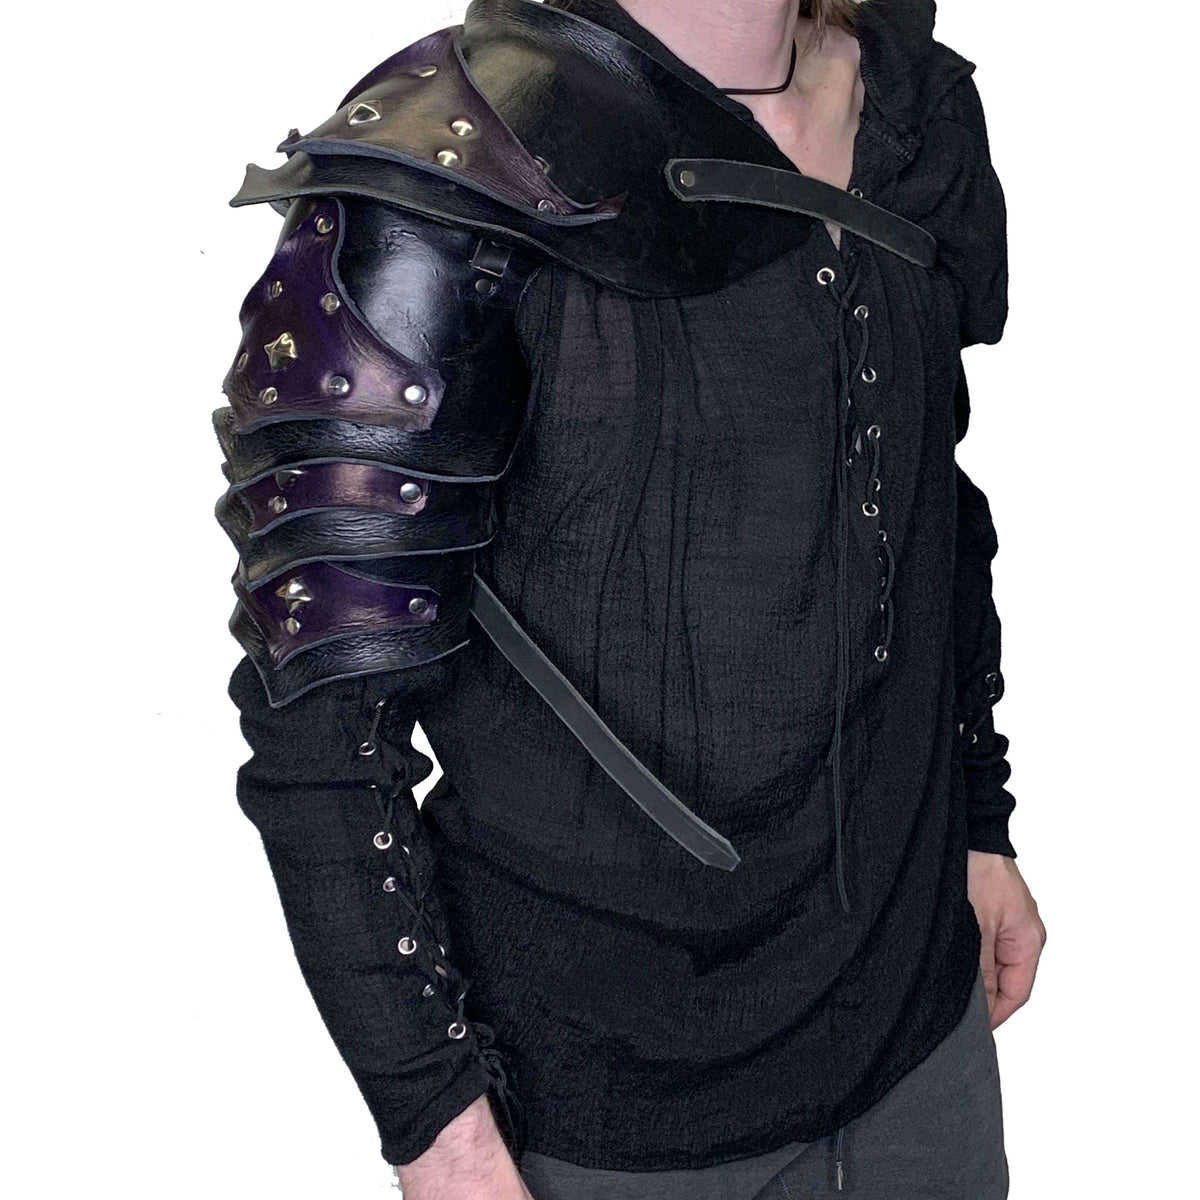 Black & Purple Leather Medieval Pauldron for Purchase